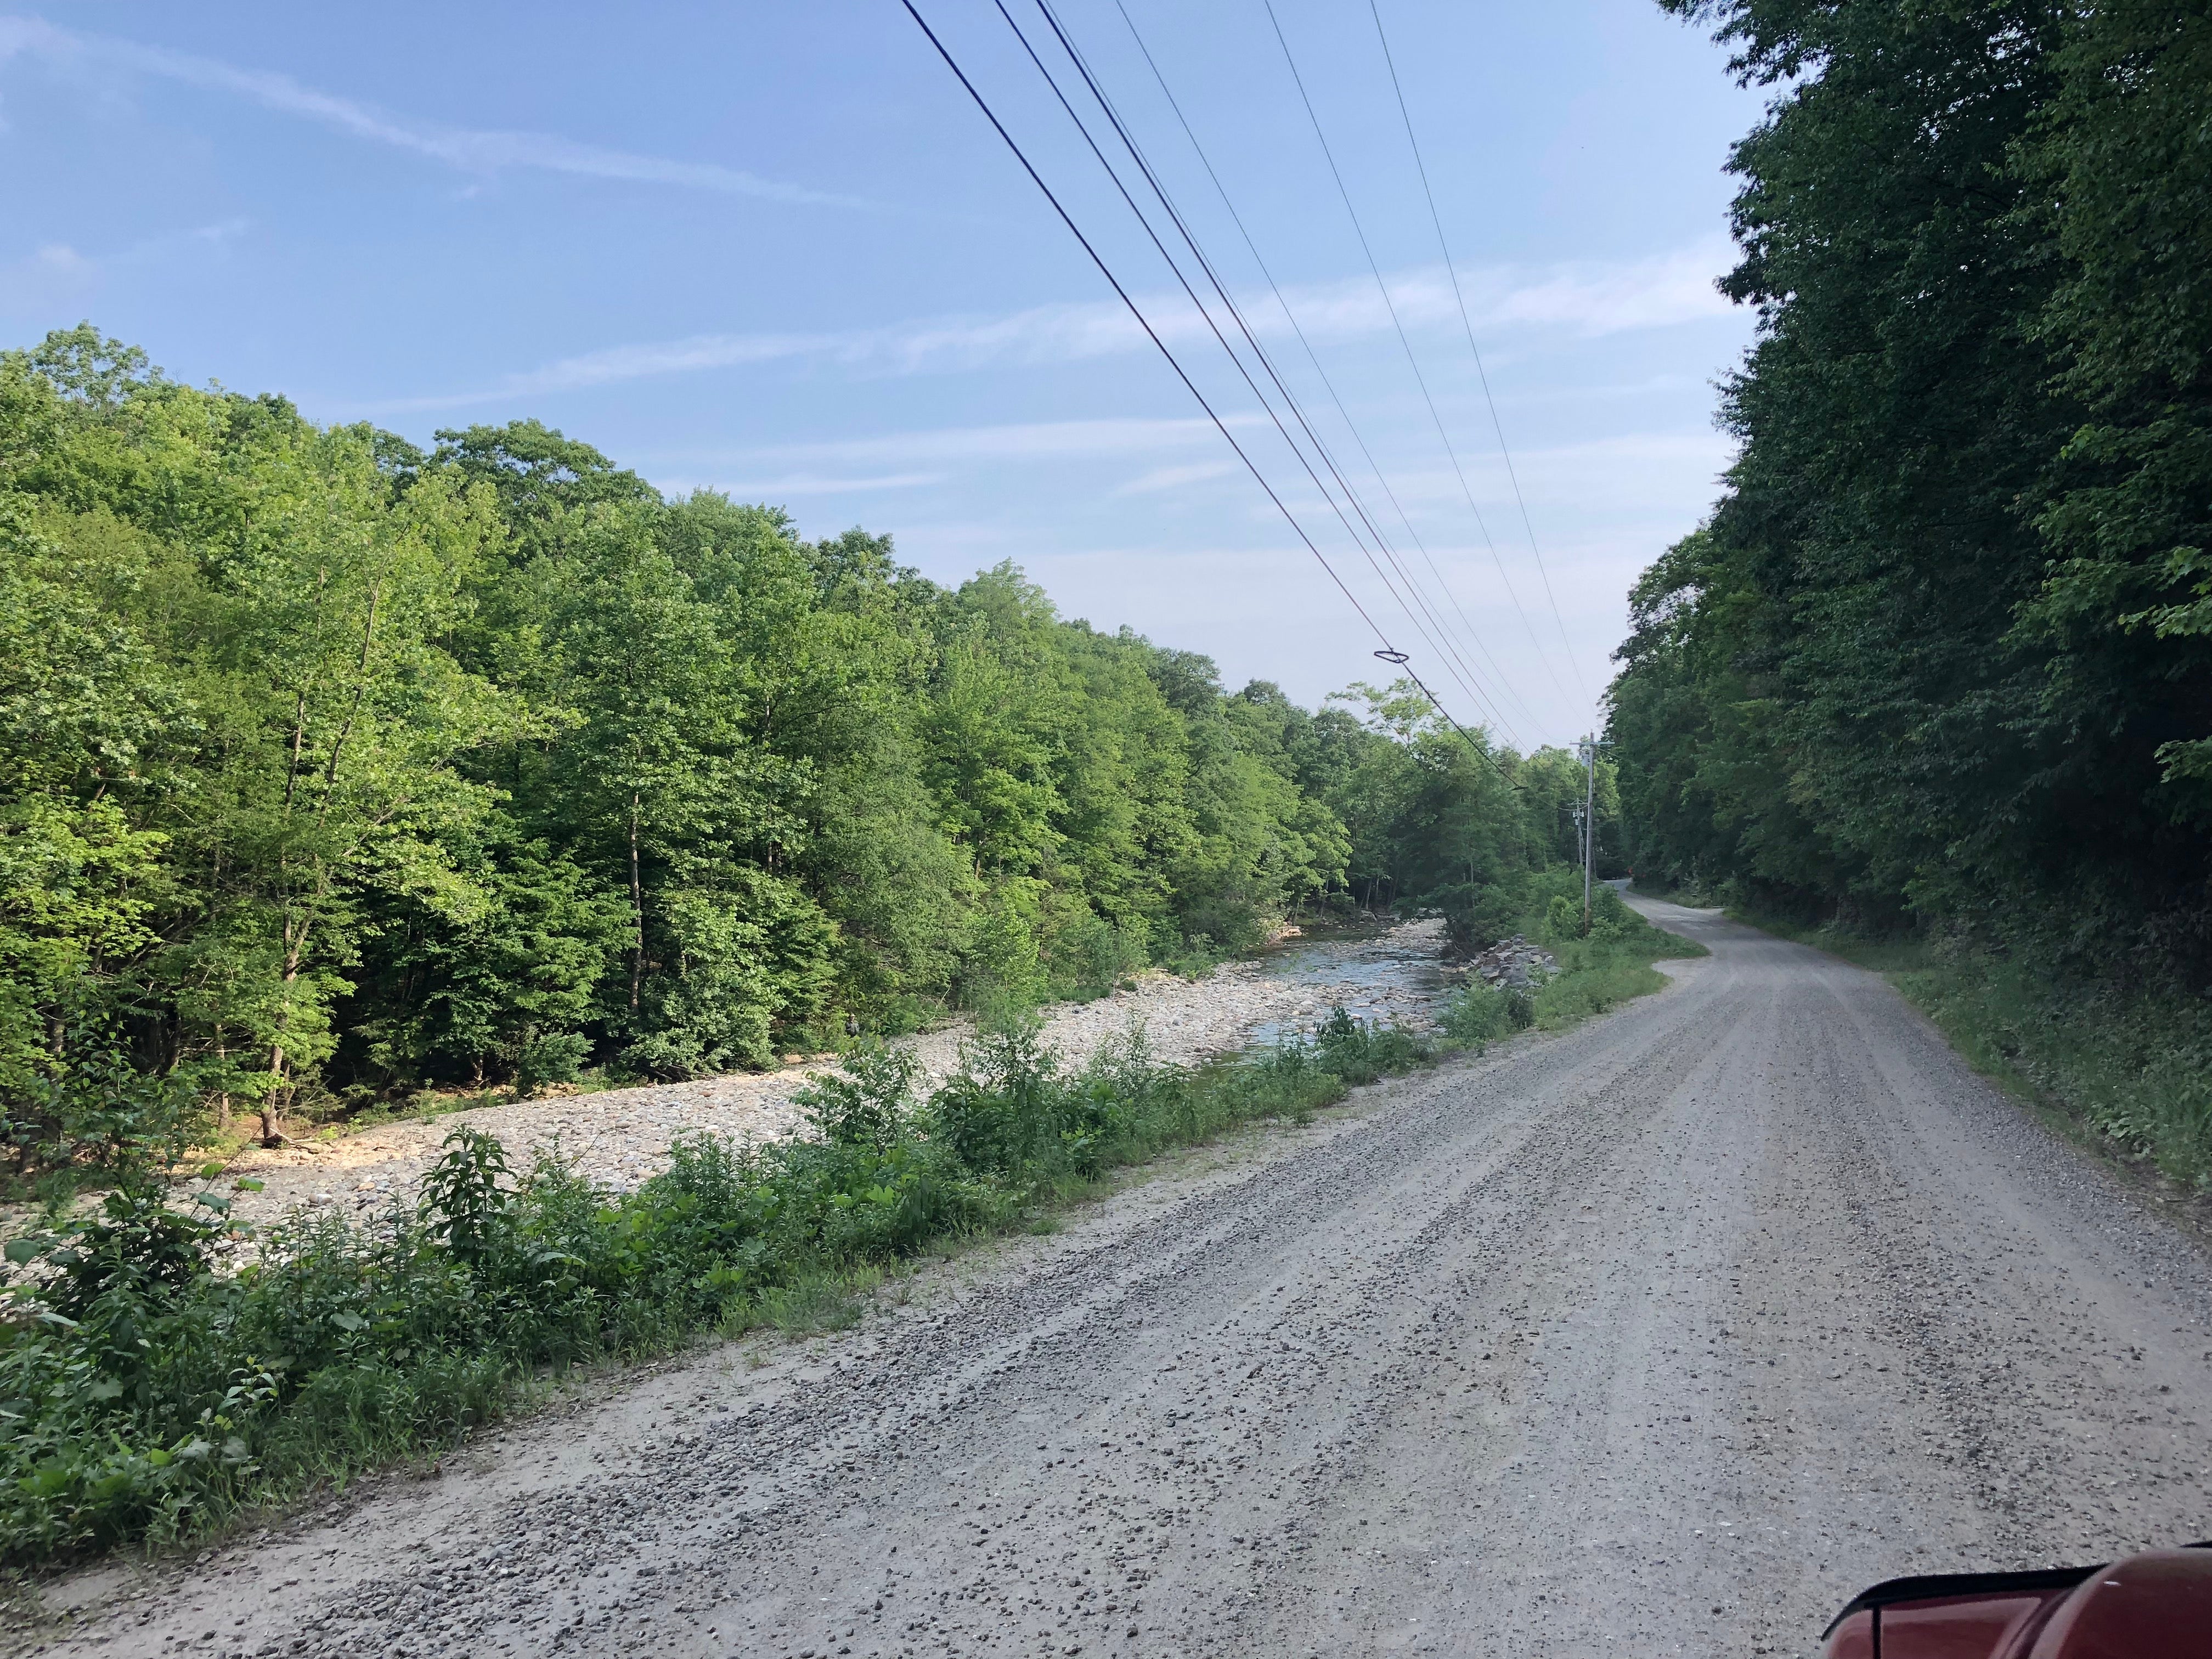 The gravel road coming in. Not too bad - wide and a good grade. Only one sharp-ish turn that is navigable with a wide approach.